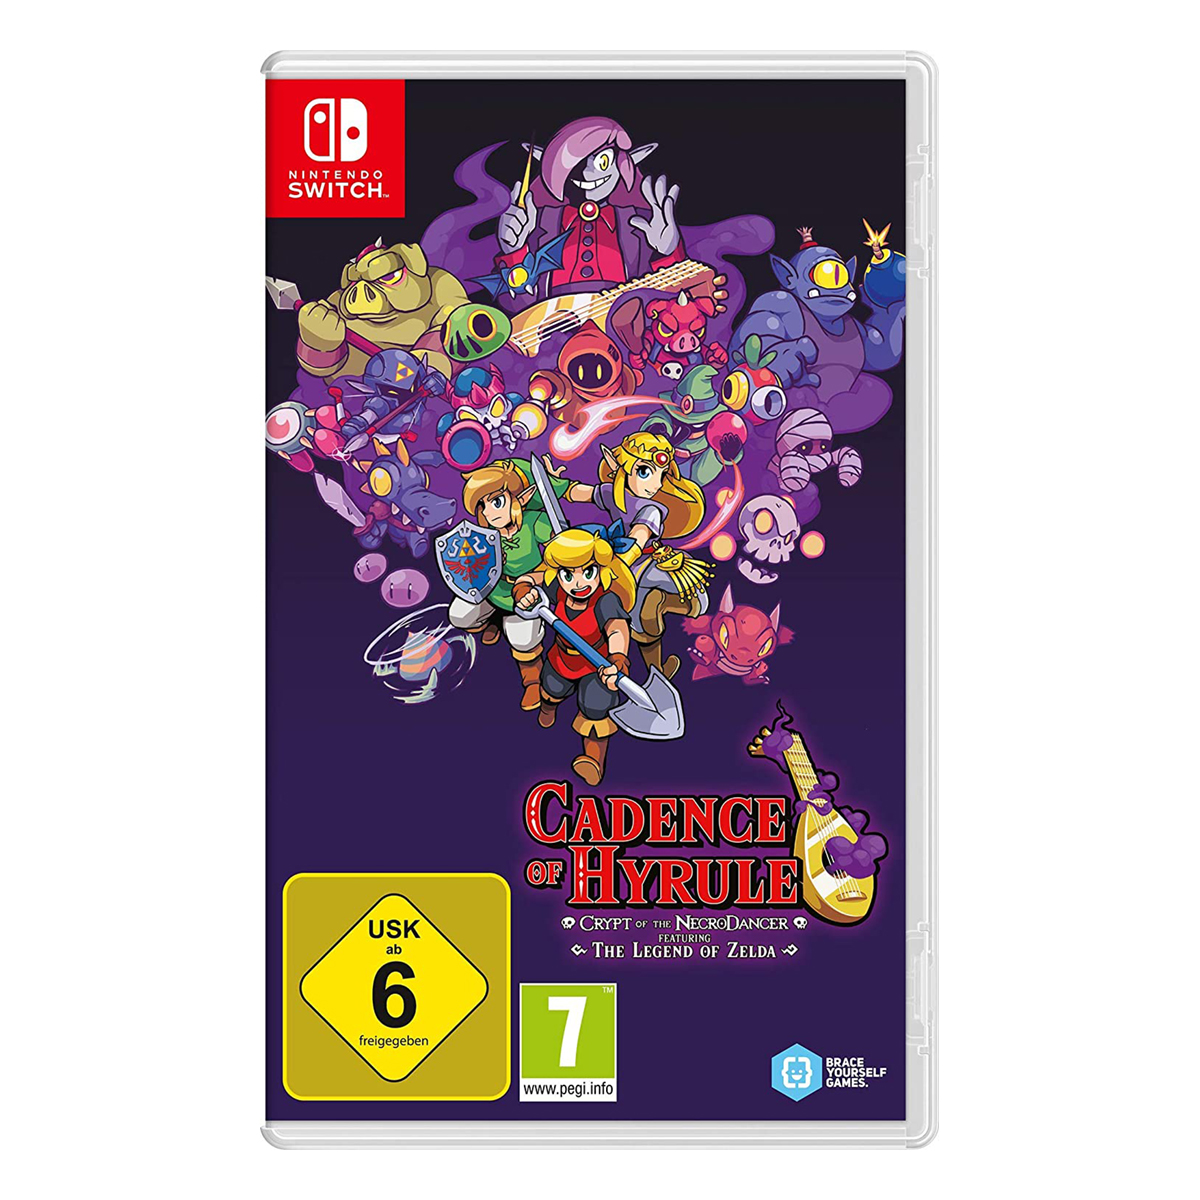 Cadence of Hyrule Switch [Nintendo Crypt NecroDancer of Switch] - the